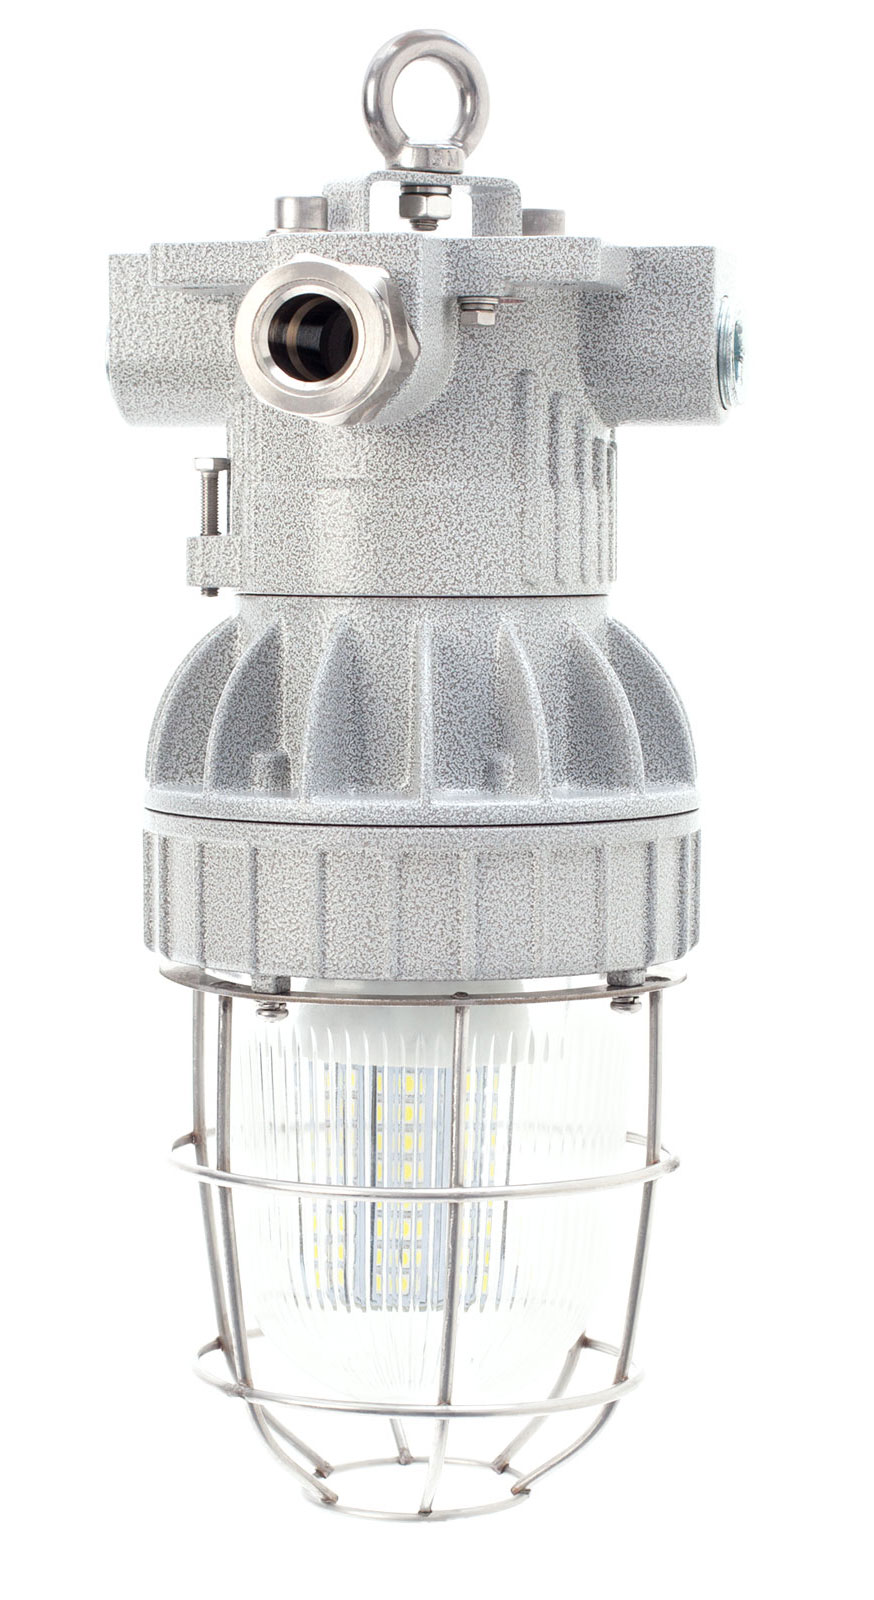 Explosion-proof light fixtures SGJ01 (EV) for different lamps with Е27 socket (for incandescent lamps, energy saving lamps, etc.)